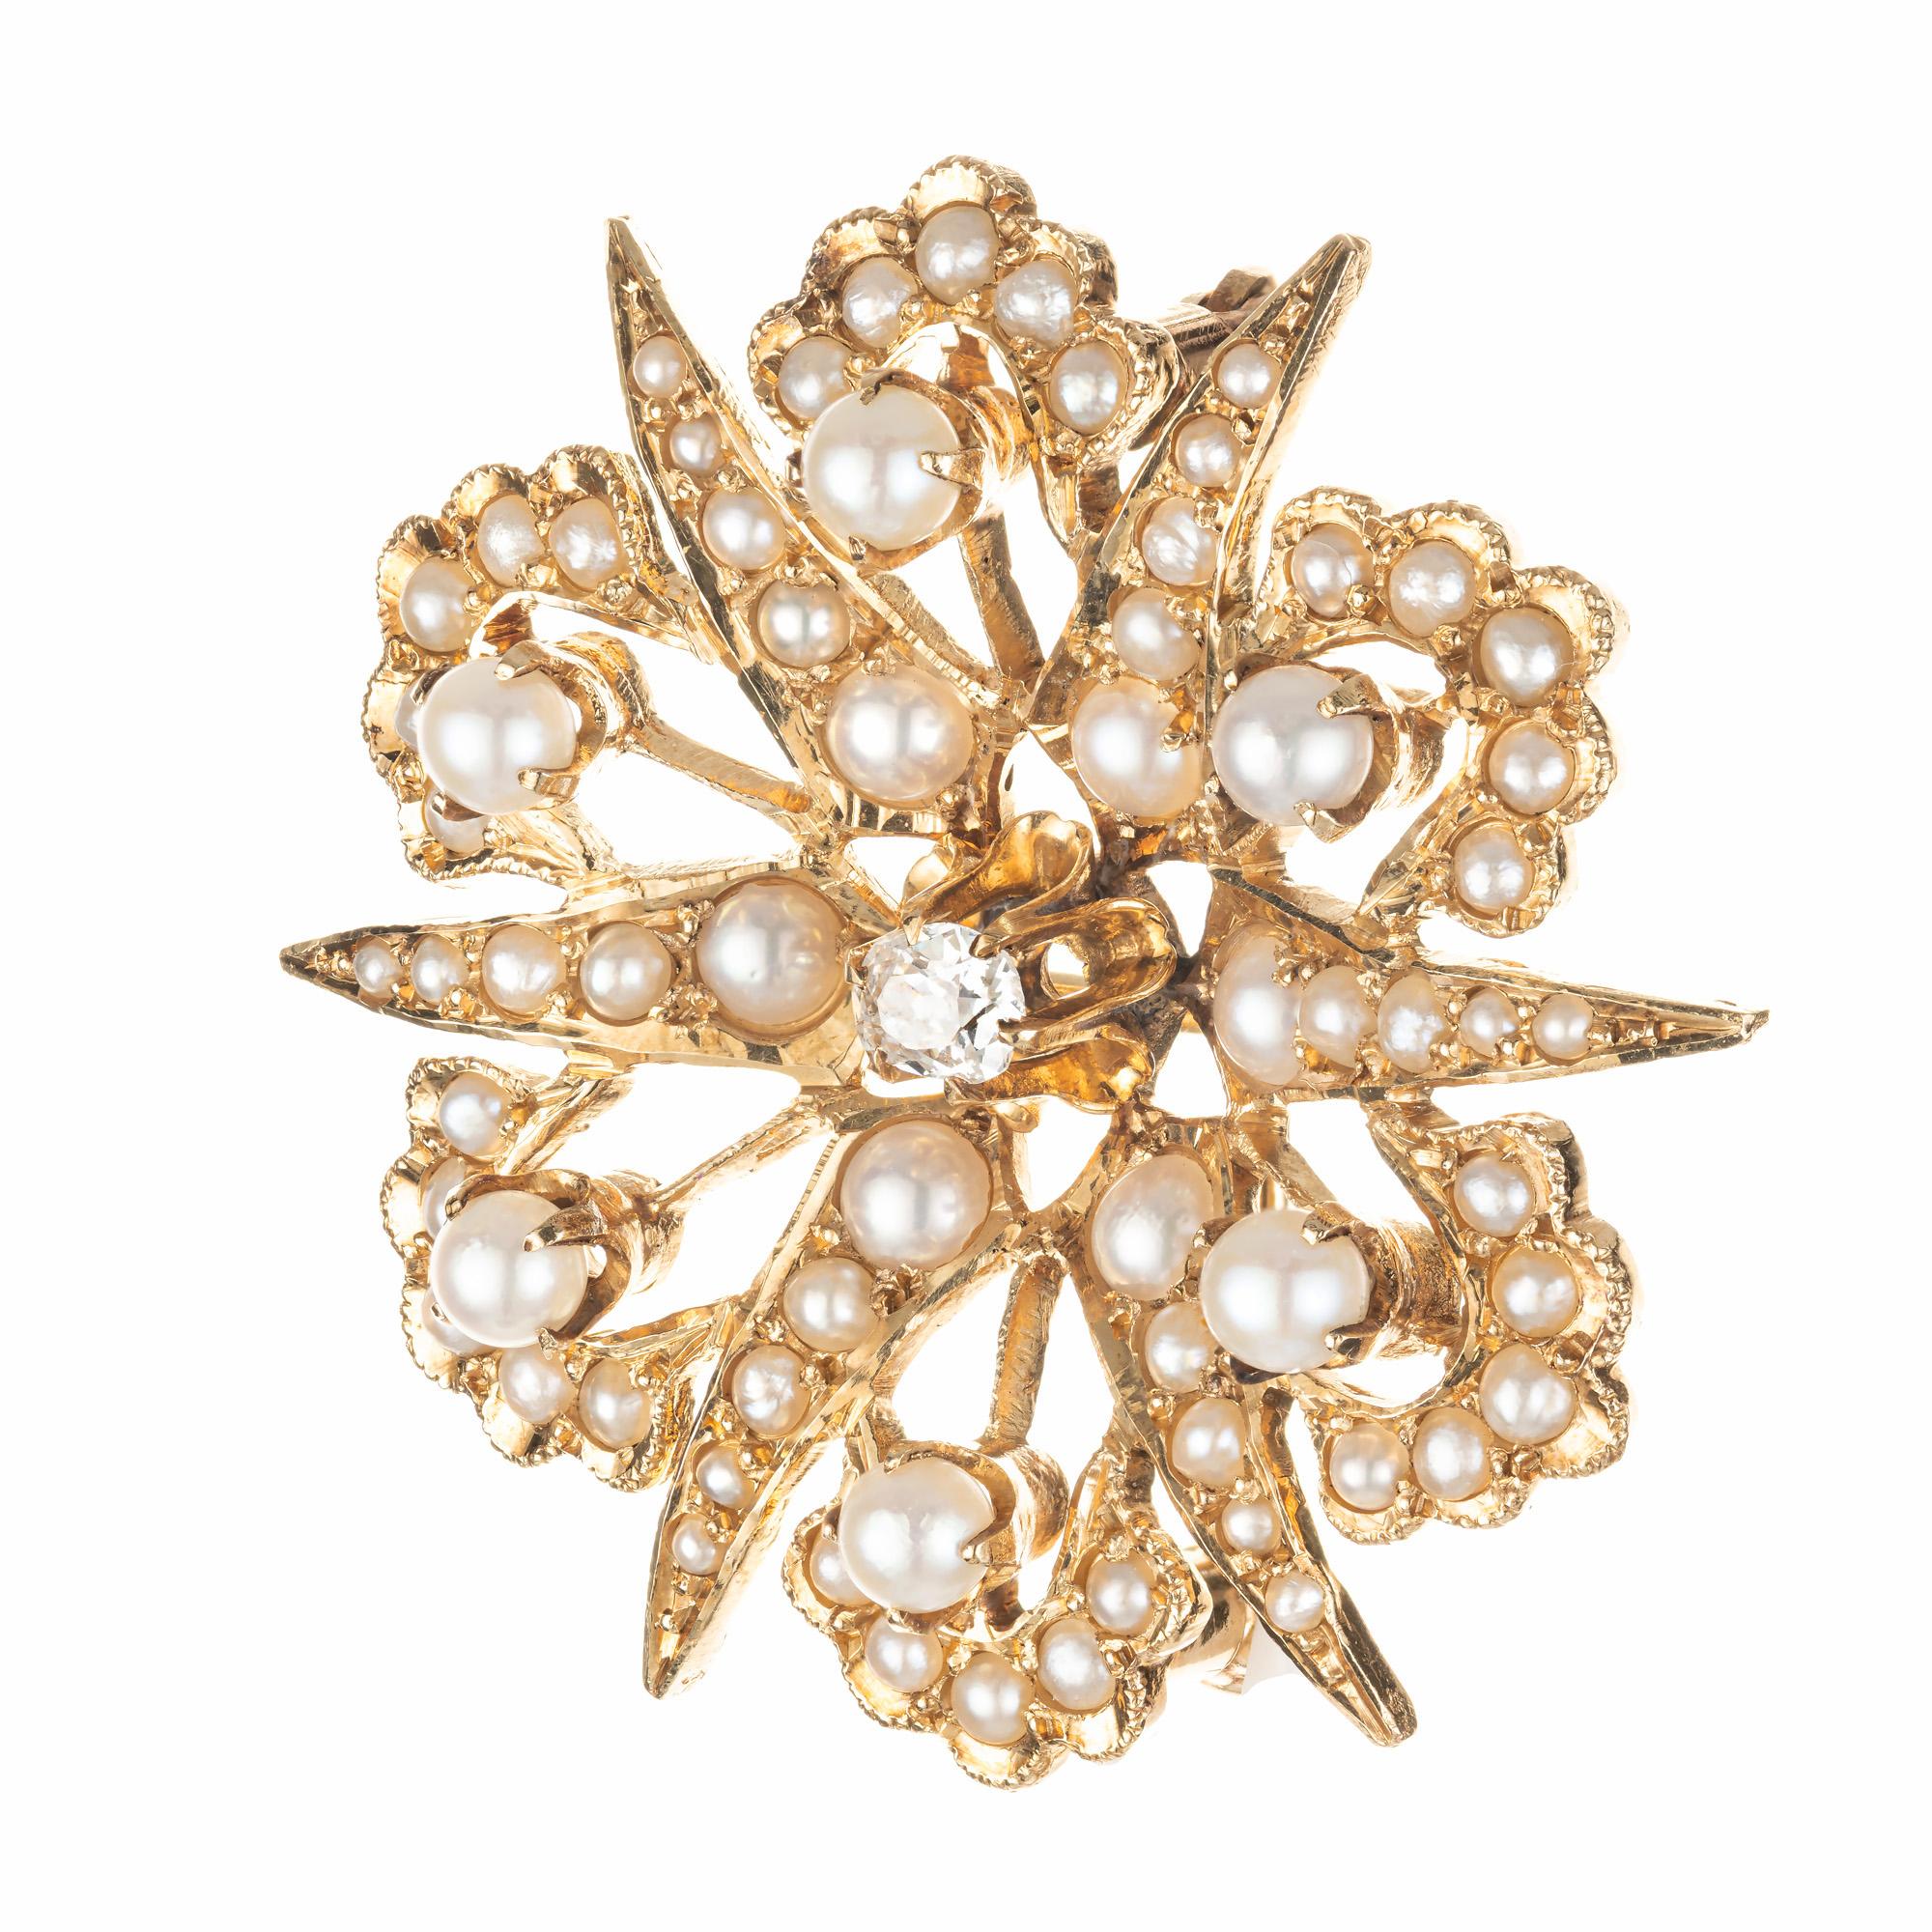 Turn of the century, Antique cushion cut diamond natural pearl brooch pendant. 1 old mine cut center diamond set in 14k rose gold with 66 white and gray accent pearls. circa 1900's

6 white/ gray pearls, 3.2mm
60 white/ gray seed pearls, 3.0mm